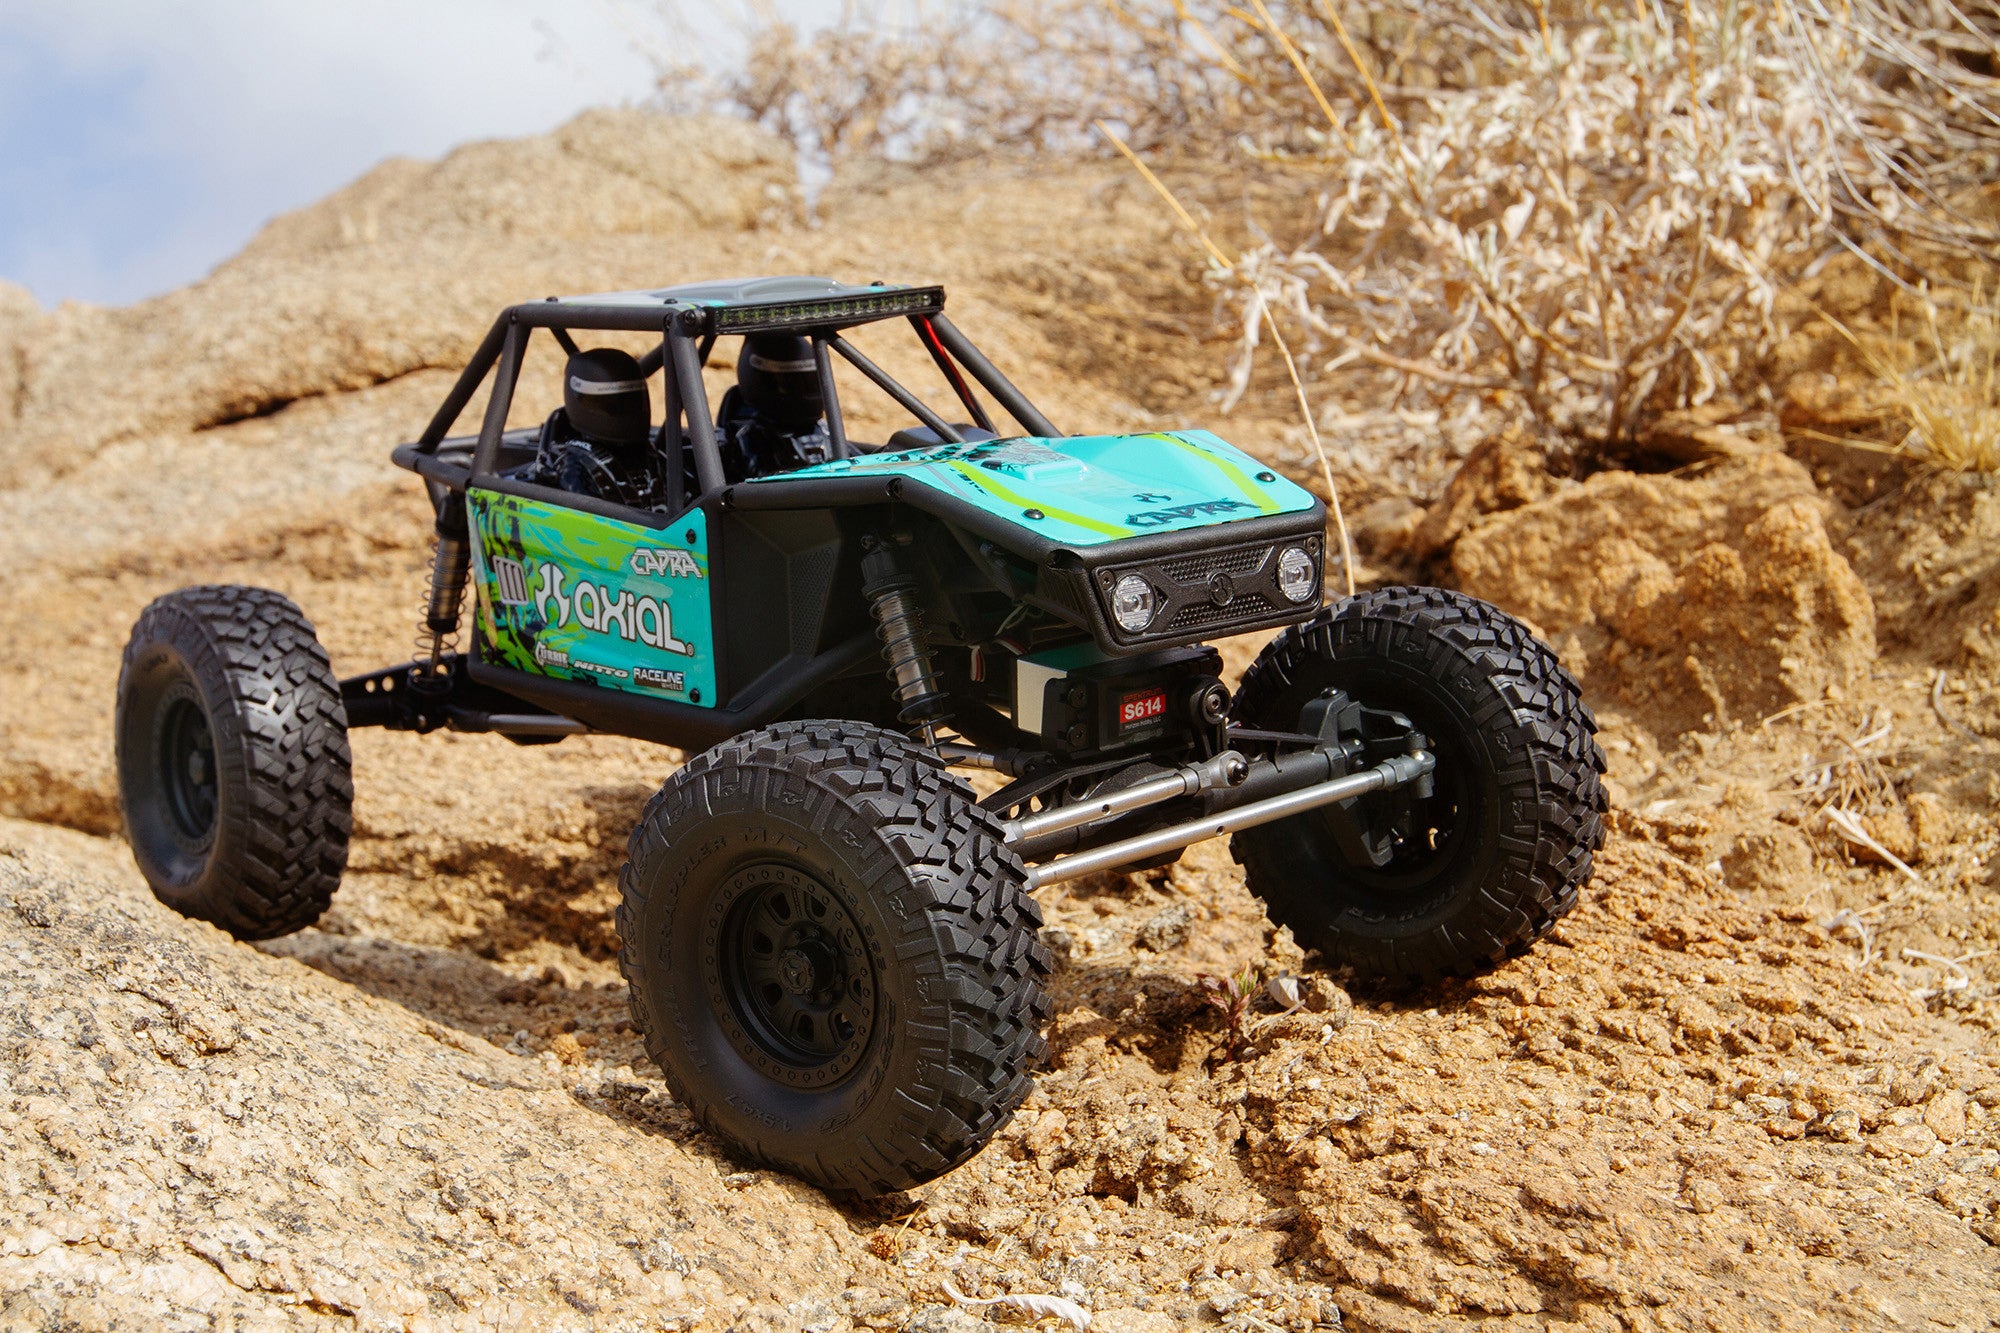 Axial Capra 1.9 Unlimited Trail Buggy RTR AXI03000